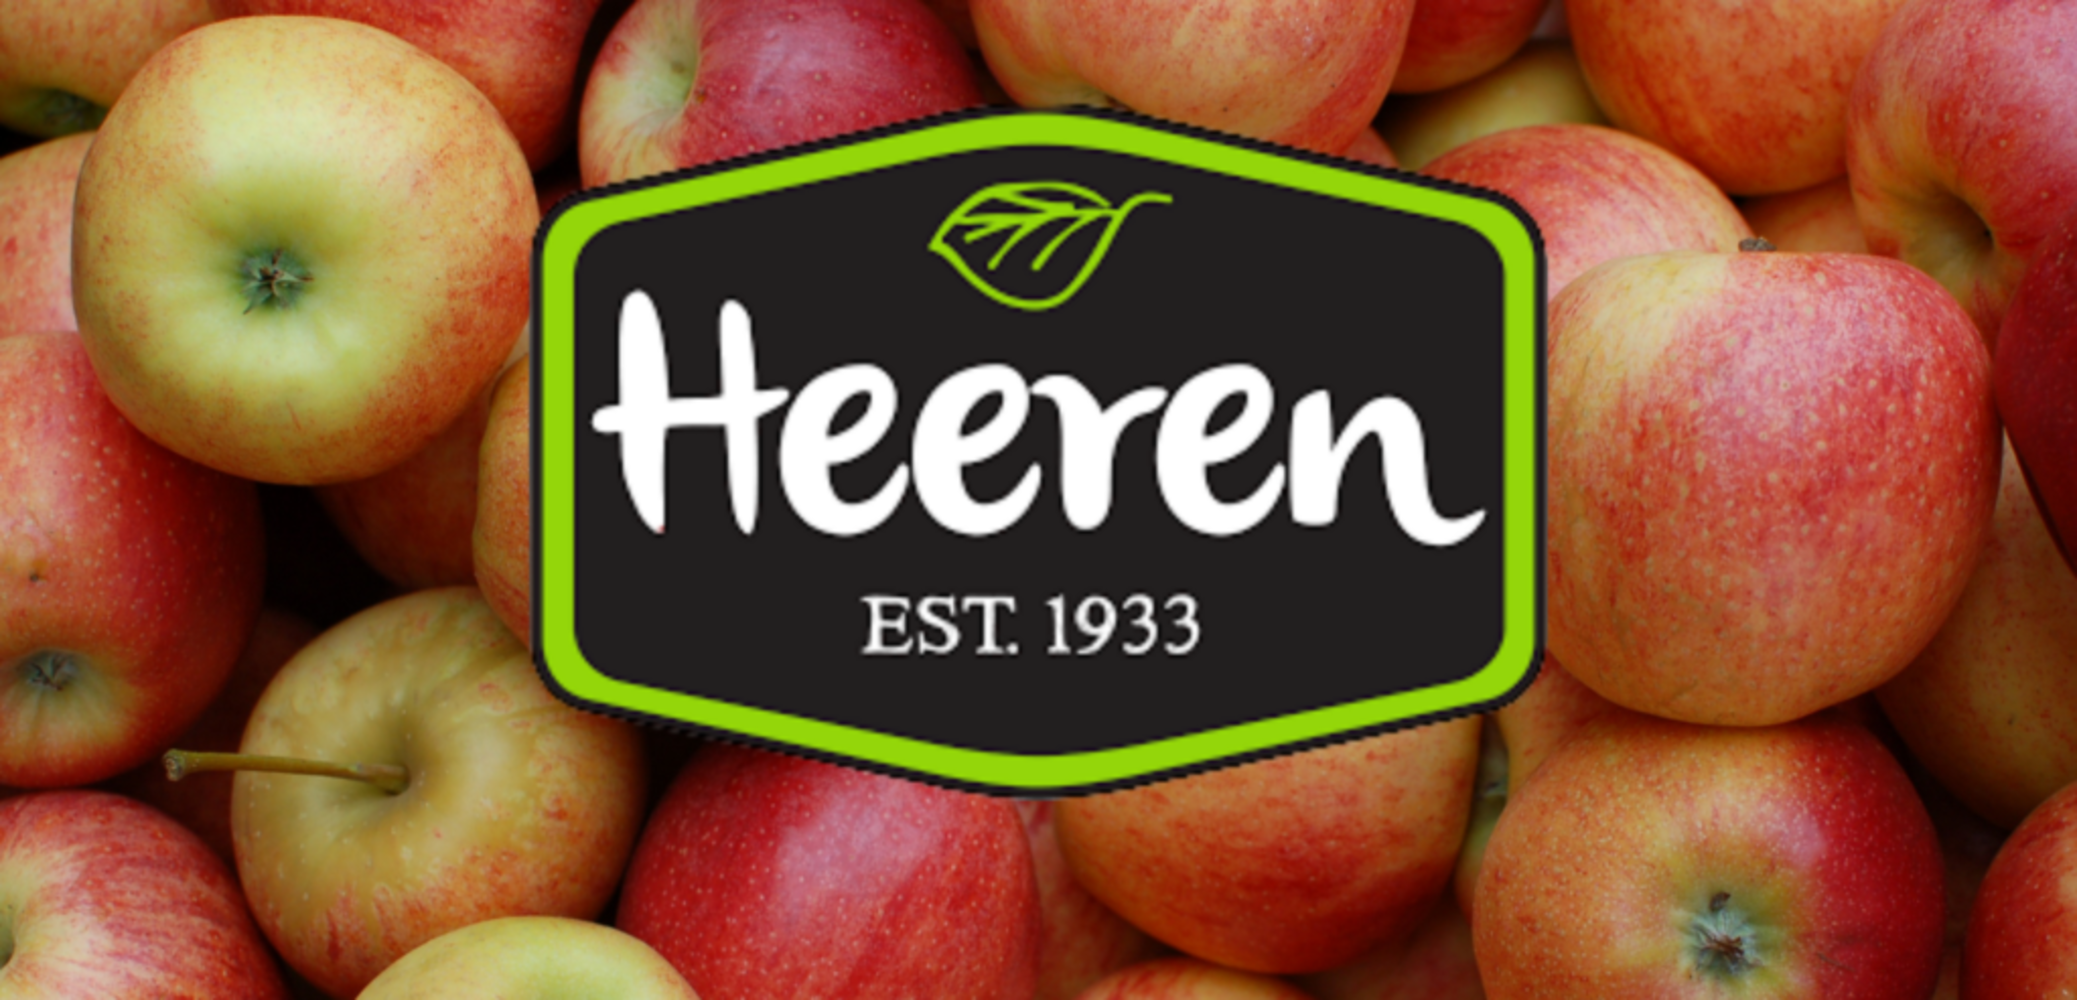 Heeren Brothers State of the Art Apple & Fruit Receiving, Washing, Grading & Packaging Plant: Fully Automated MAF Roda Facility & Support